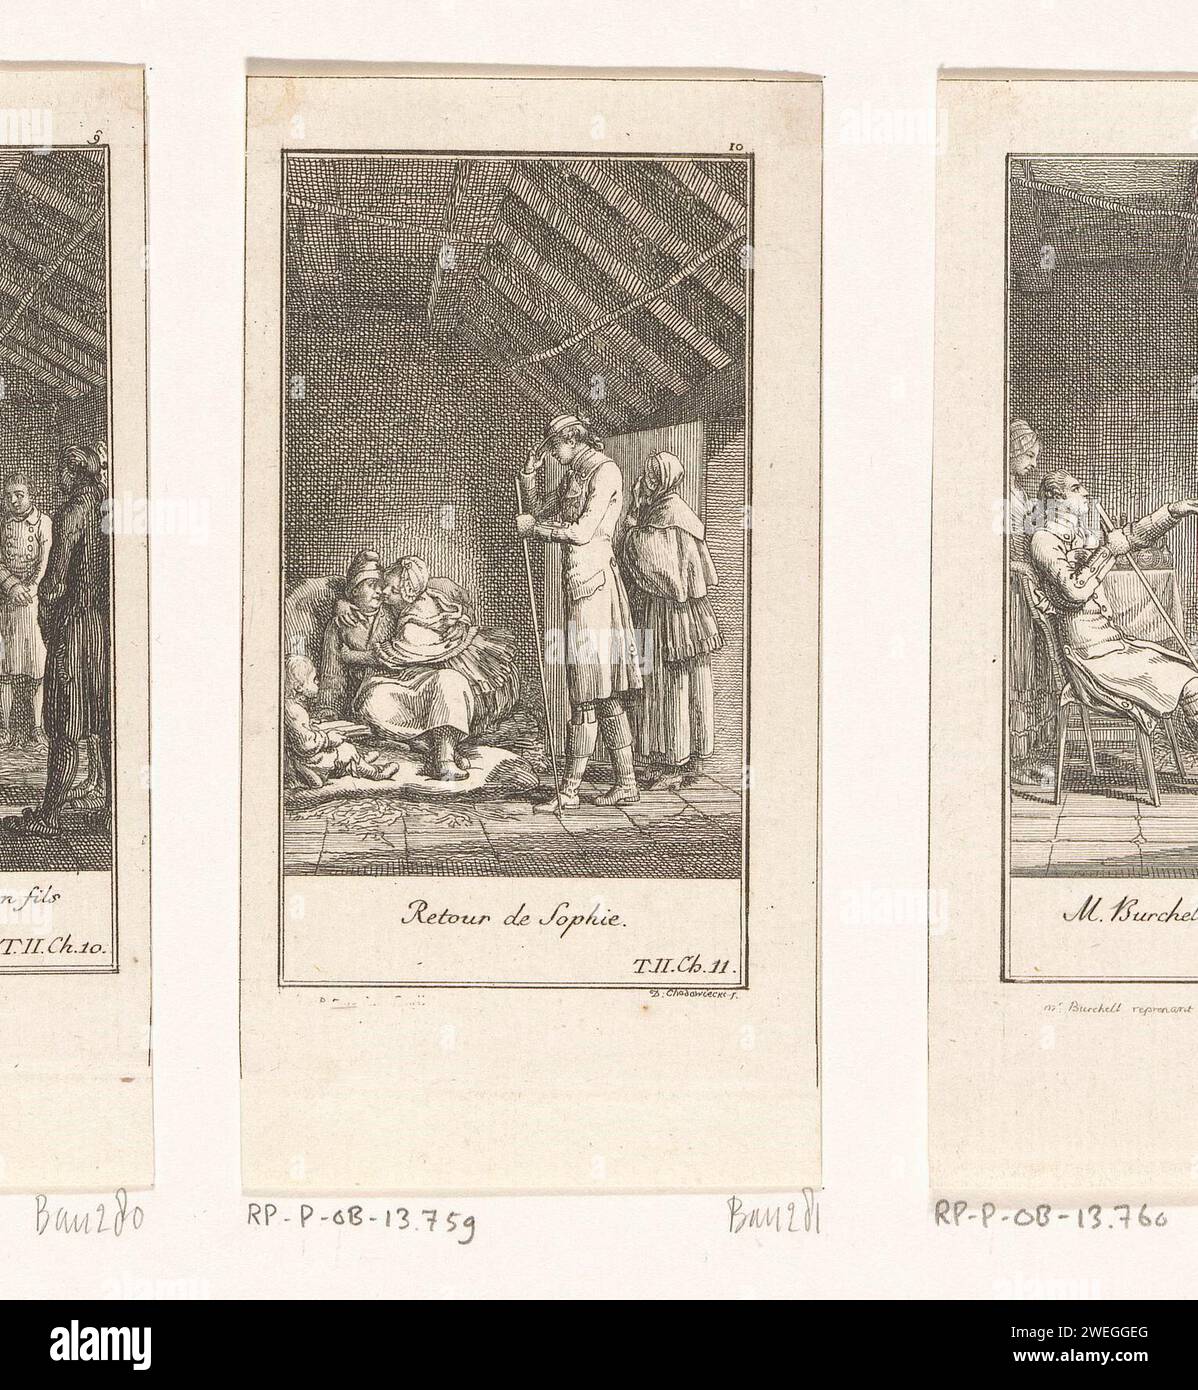 Return from Sophie, Daniel Nikolaus Chodowiecki, 1776 print After being abducted for some time, Sophie is back. She hugs her father on the floor of the cell. Mr. Burchell. Numbered at the top right: 10.  paper etching (GOLDSMITH, The Vicar of Wakefield) specific works of literature (with AUTHOR, title). prison, jail. father and daughter(s) (family group) Stock Photo